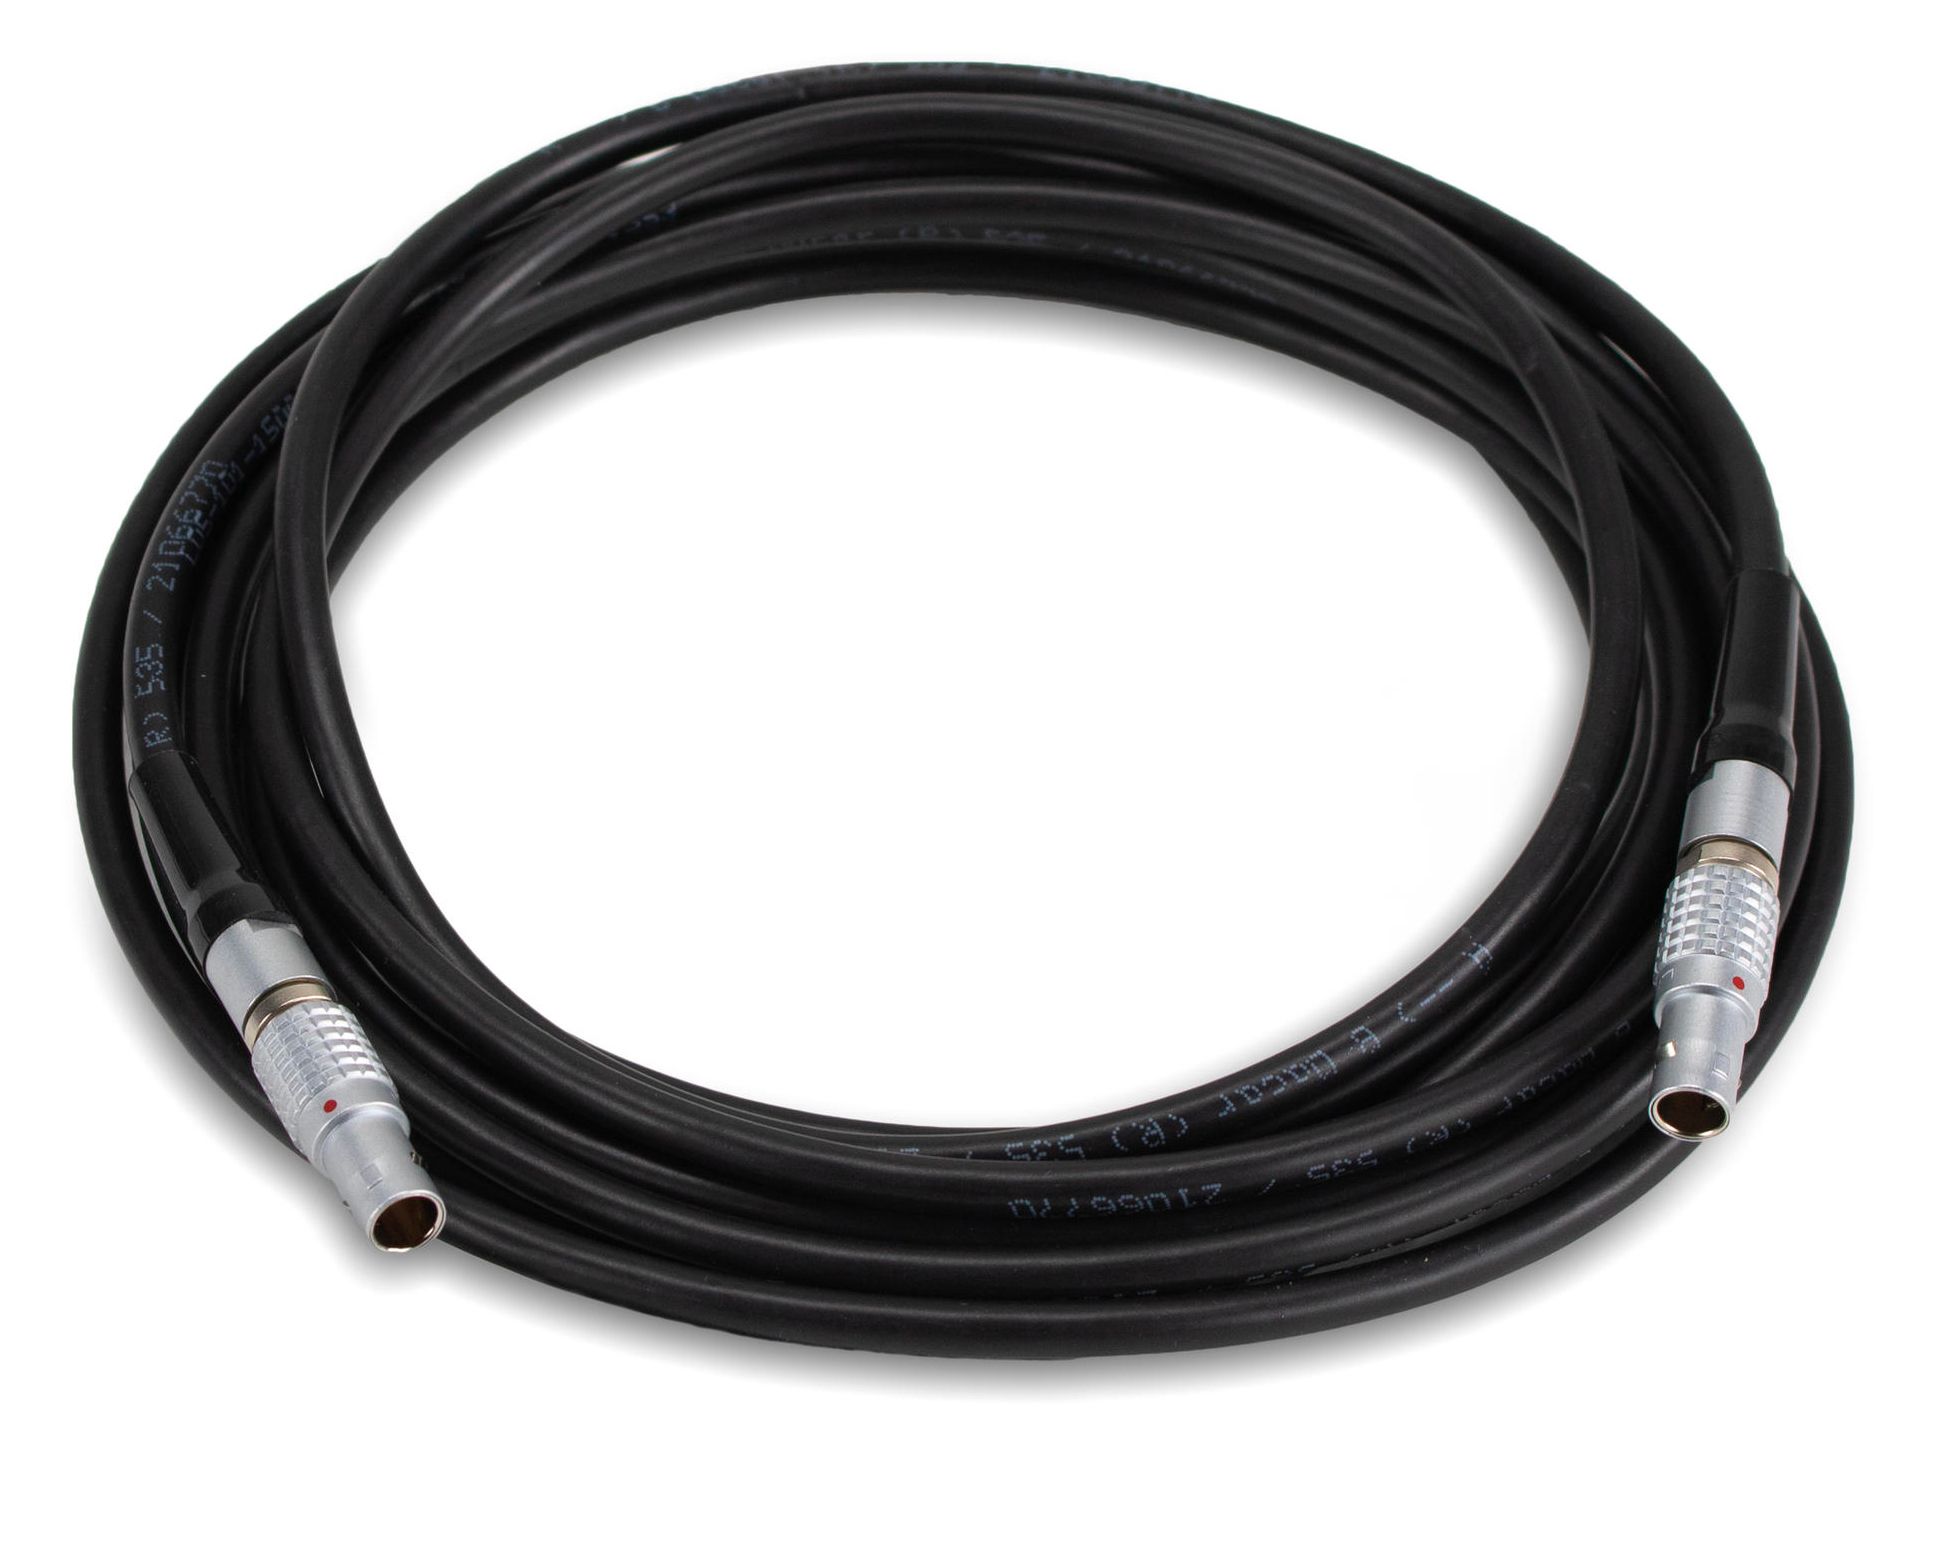 ARRI - Cable for Orbiter Control Panel - 15m / 49,2 ft.